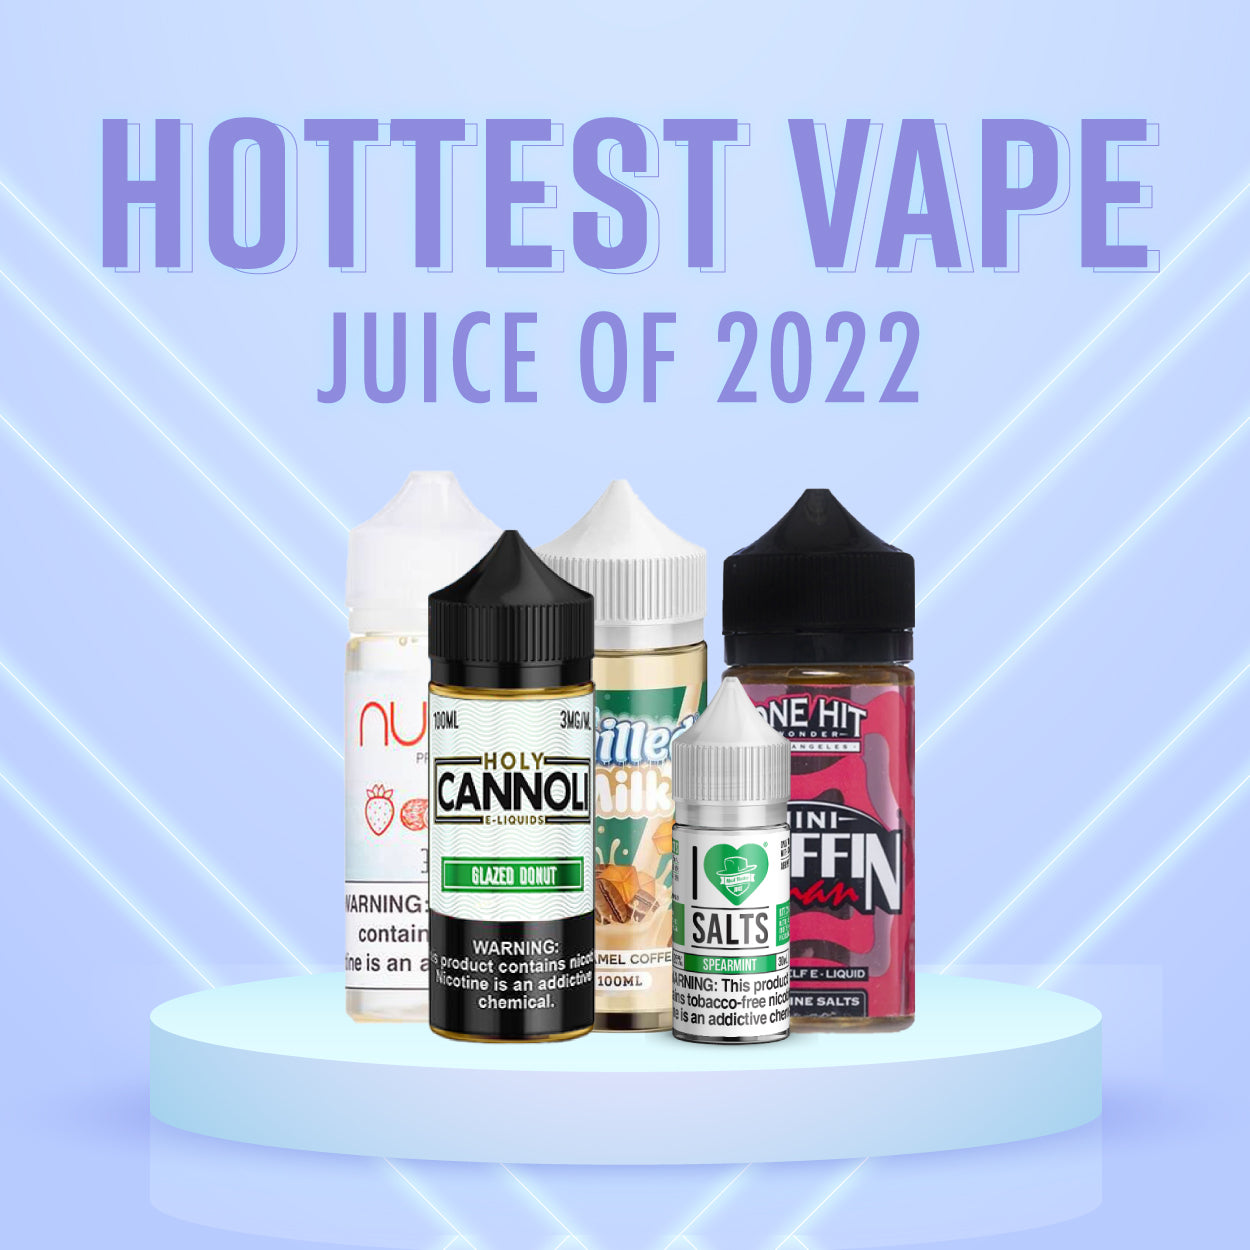 Top 5 Hottest Vape Juices for 2022